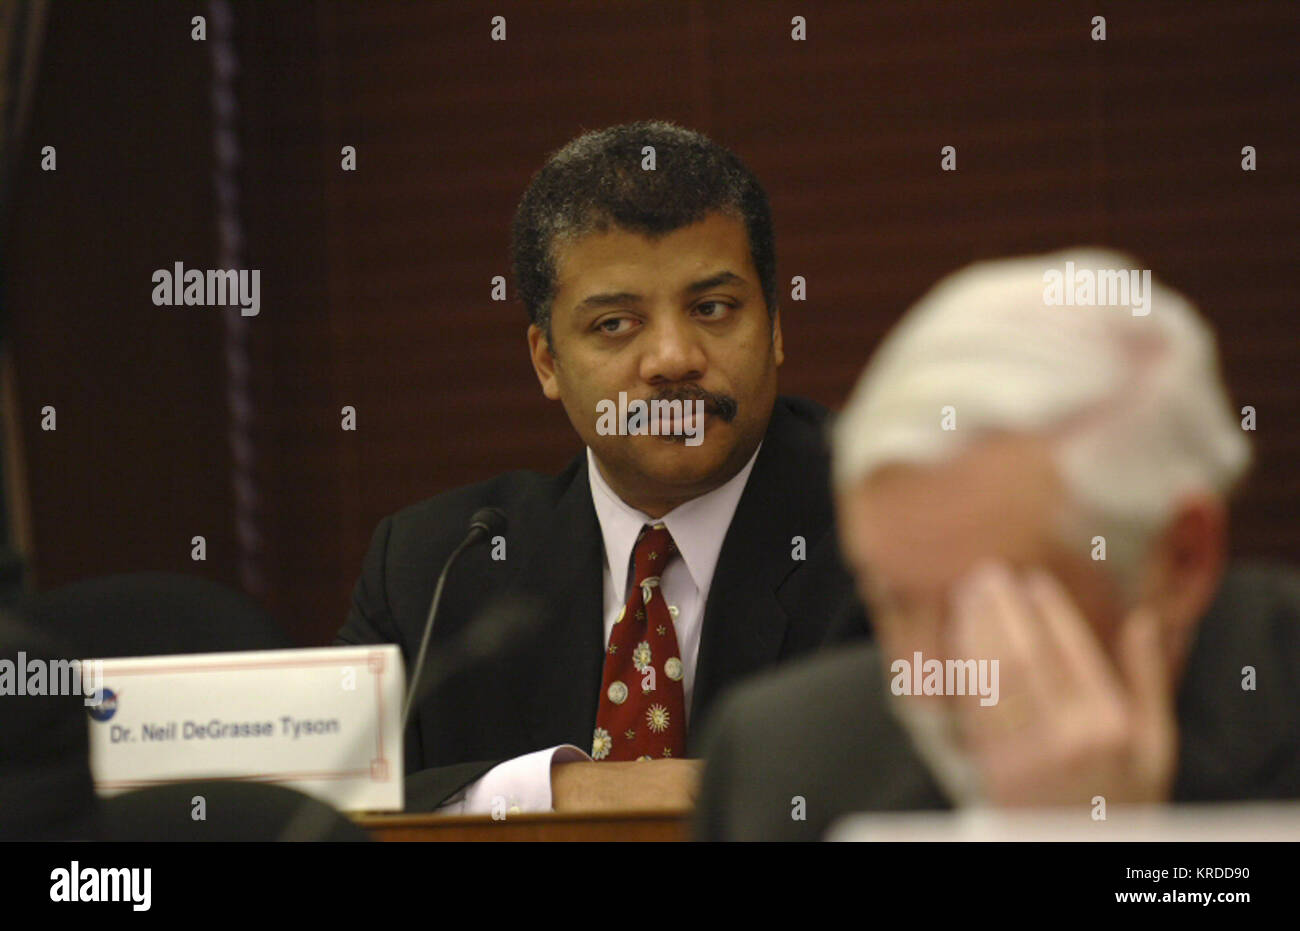 Dr. Neil DeGrasse Tyson, NASA advisory Council member listens during a meeting of the council at the Rayburn Building on Capitol Hill.  The NASA Advisory Council will be chaired by former Senator and Apollo astronaut Harrison H. "Jack" Schmitt. Former Apollo 11 astronaut Neil Armstrong joins Schmitt as one of the distinguished experts on the council, along with Gen. Lester L. Lyles, USAF (Ret.), former commander, Air Force Materiel Command, Wright-Patterson Air Force Base, Ohio, and Dr. Charles F. Kennel, director, Scripps Institute of Oceanography.  Photo Credit: "NASA/Bill Ingalls" Neil deGr Stock Photo